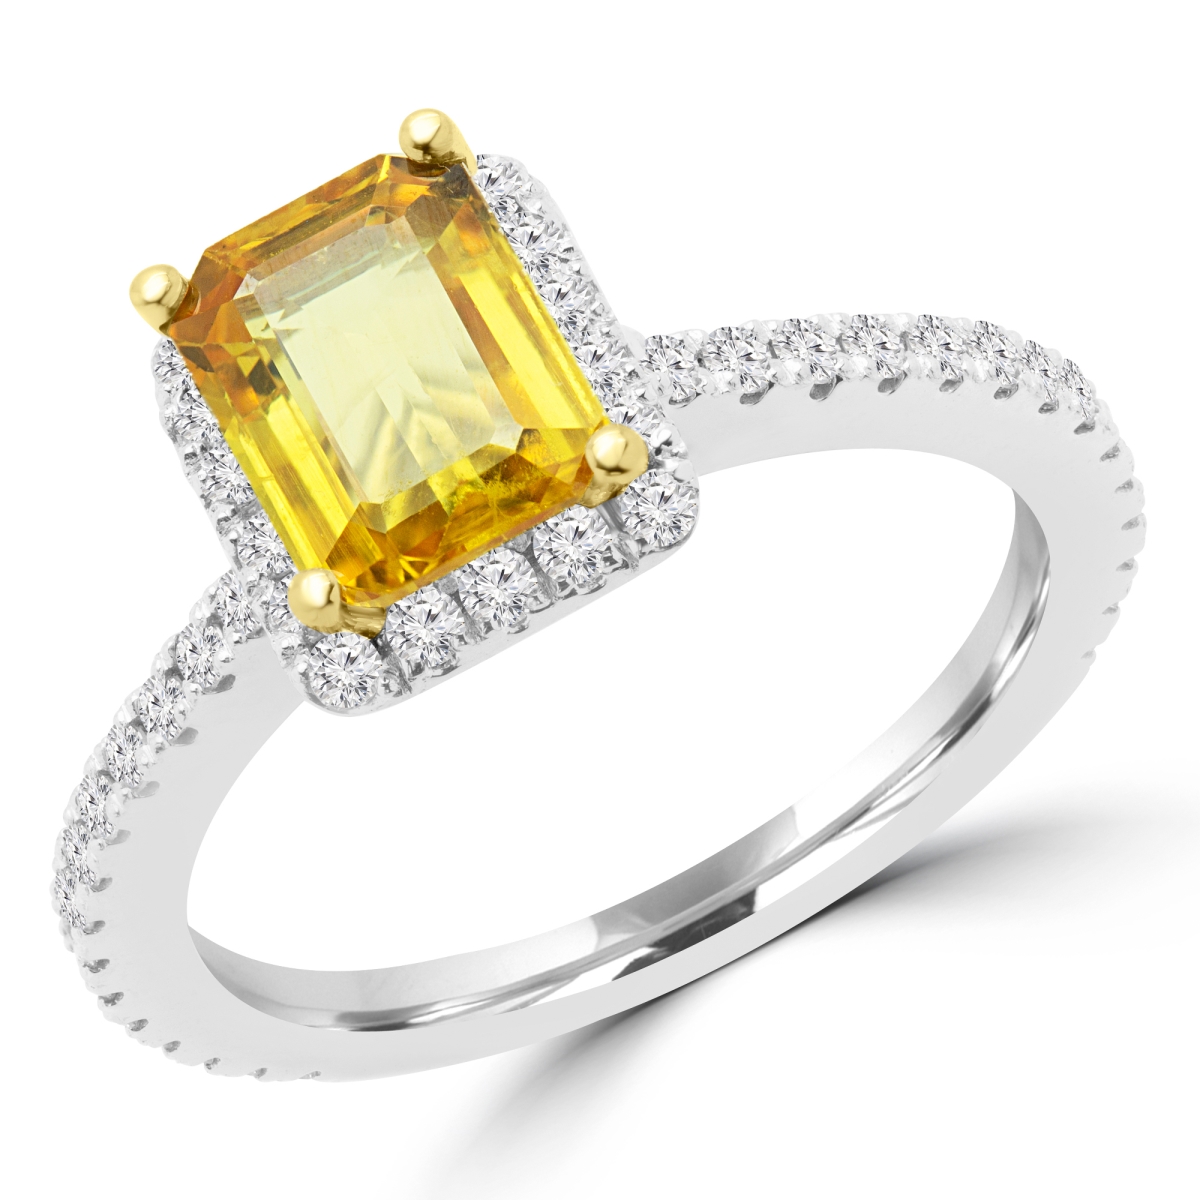 Picture of Majesty Diamonds MD170170 2.5 CTW Emerald Yellow Sapphire Halo Cocktail Ring in 14K